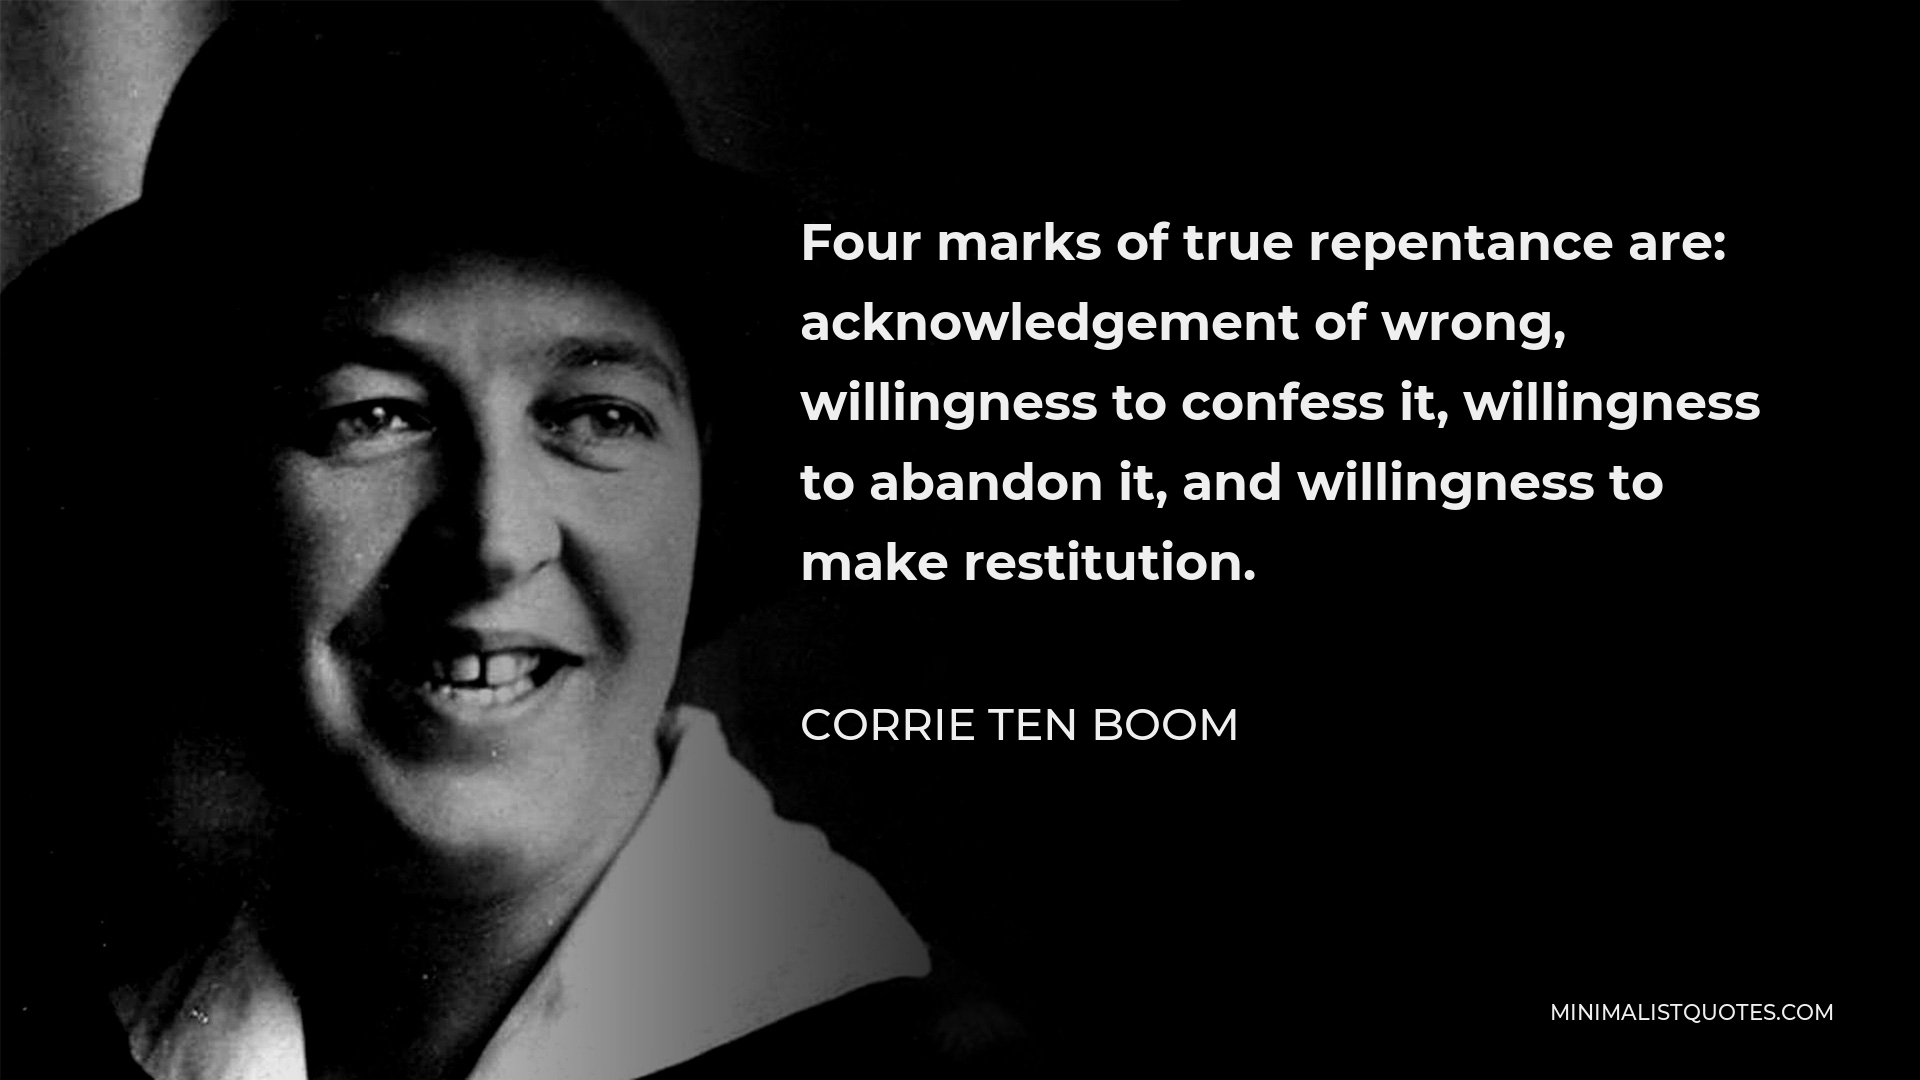 Corrie ten Boom Quote - Four marks of true repentance are: acknowledgement of wrong, willingness to confess it, willingness to abandon it, and willingness to make restitution.